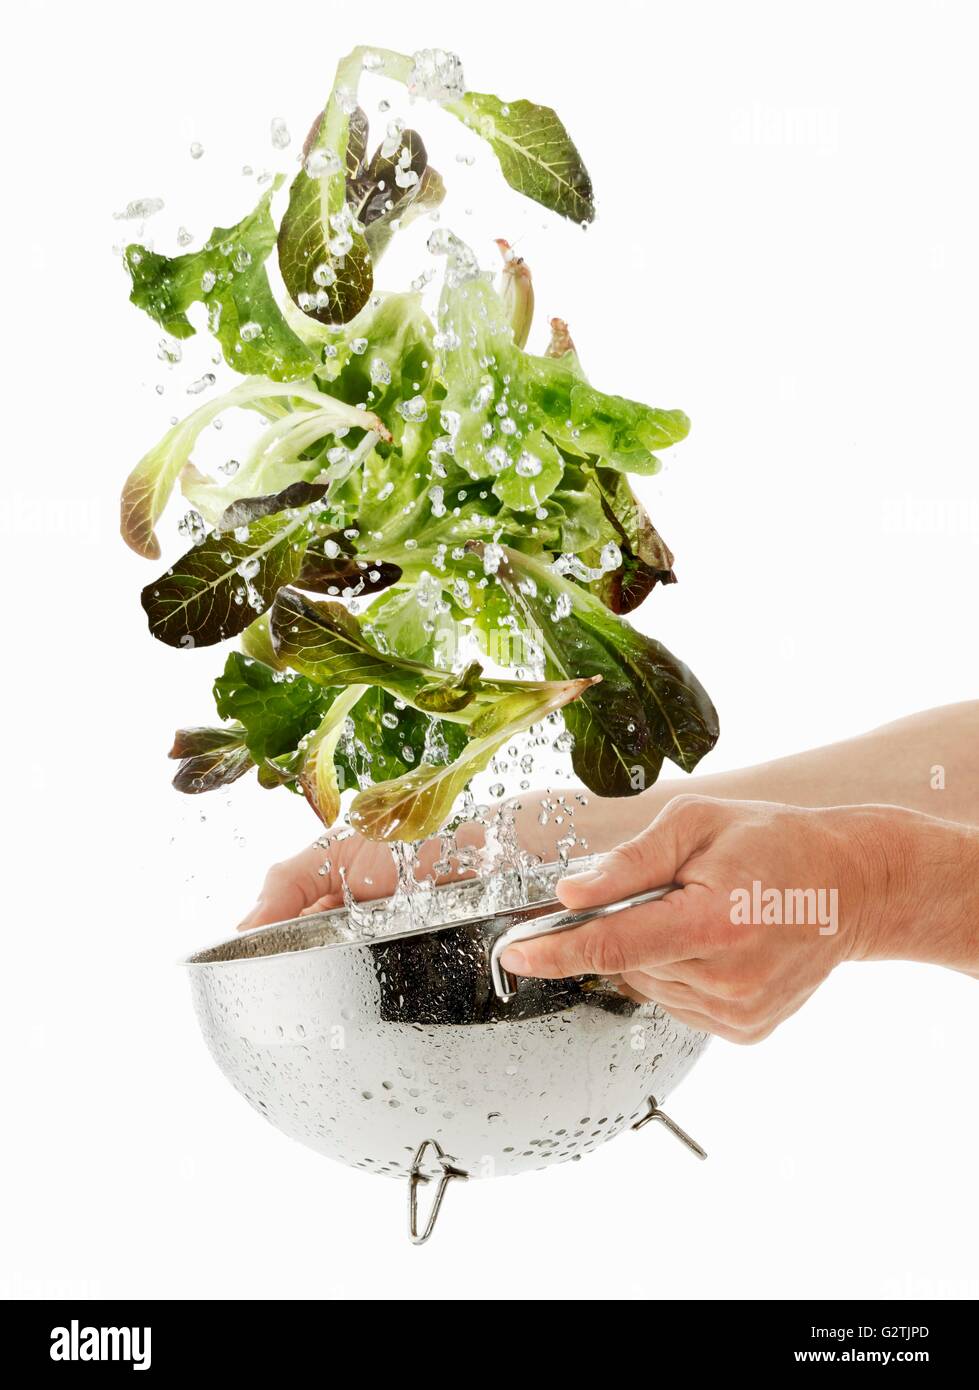 Lettuce being washed Stock Photo